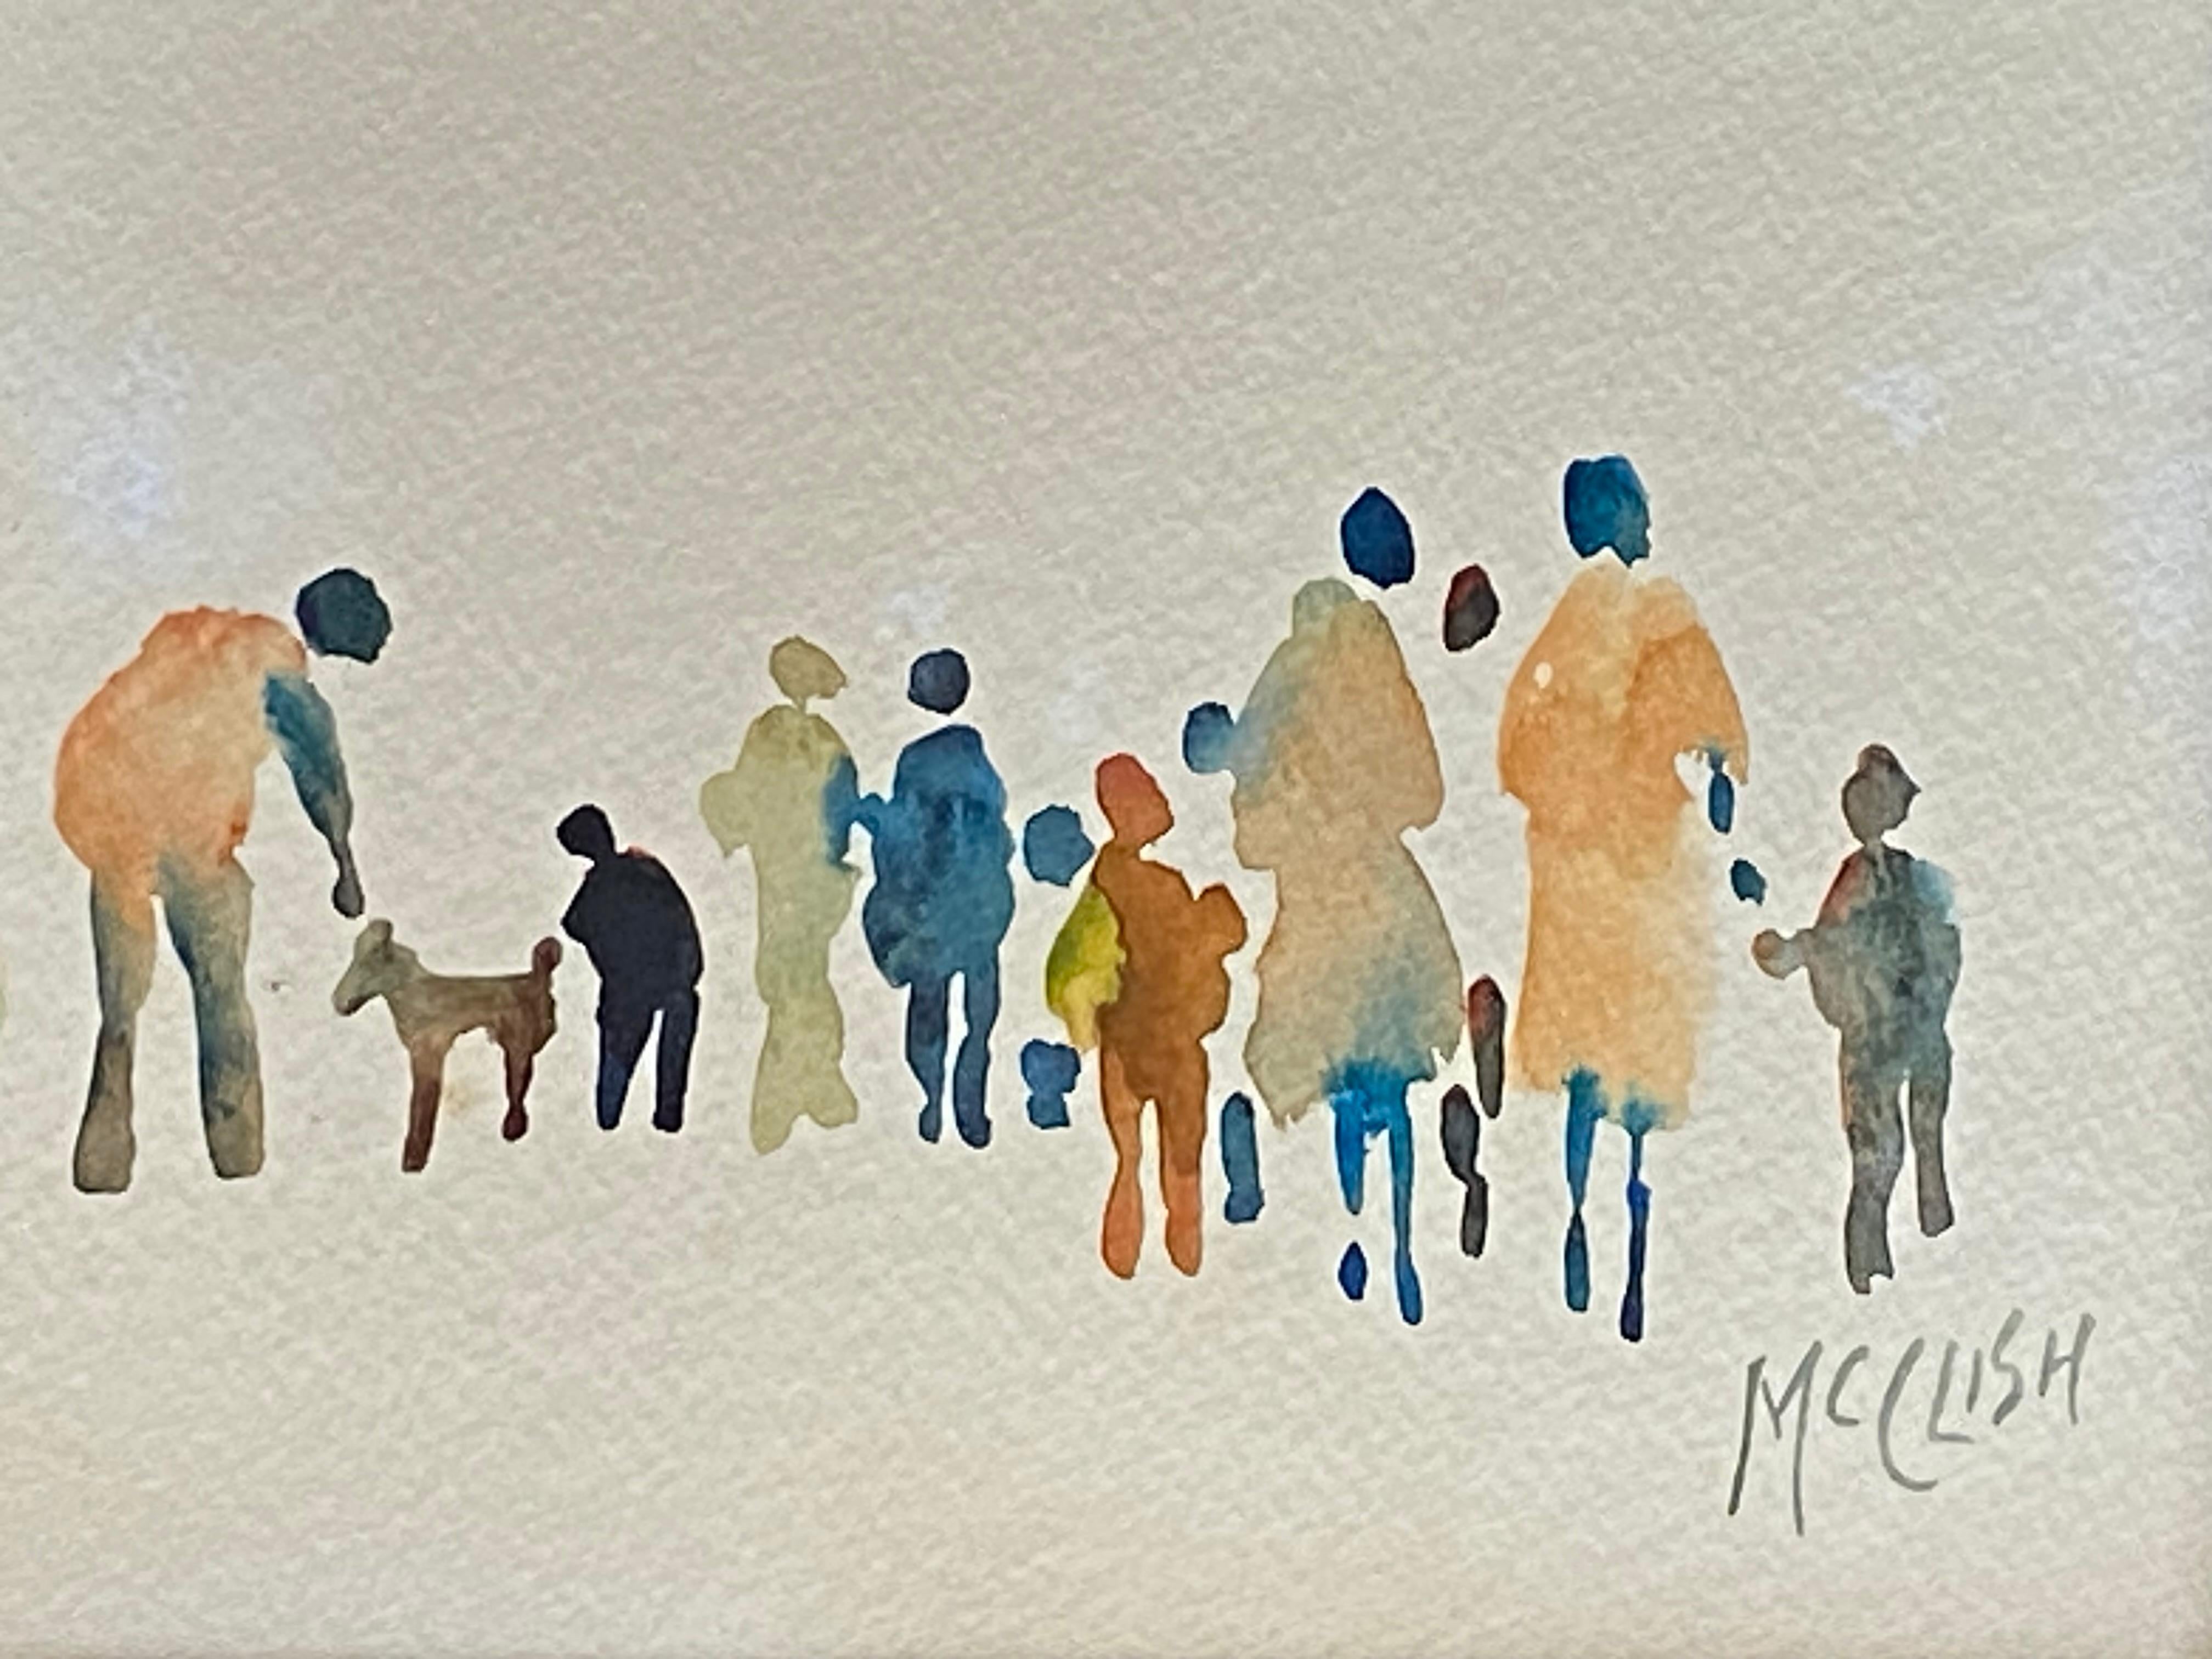 Wonderful figurative watercolor on Strathmore tinted paper by the well known Florida artist, Gerald “Jerry” Franklin McClish.  Signed lower right. Condition is excellent.  The artwork is under glass and in a new contemporary silver leaf frame that